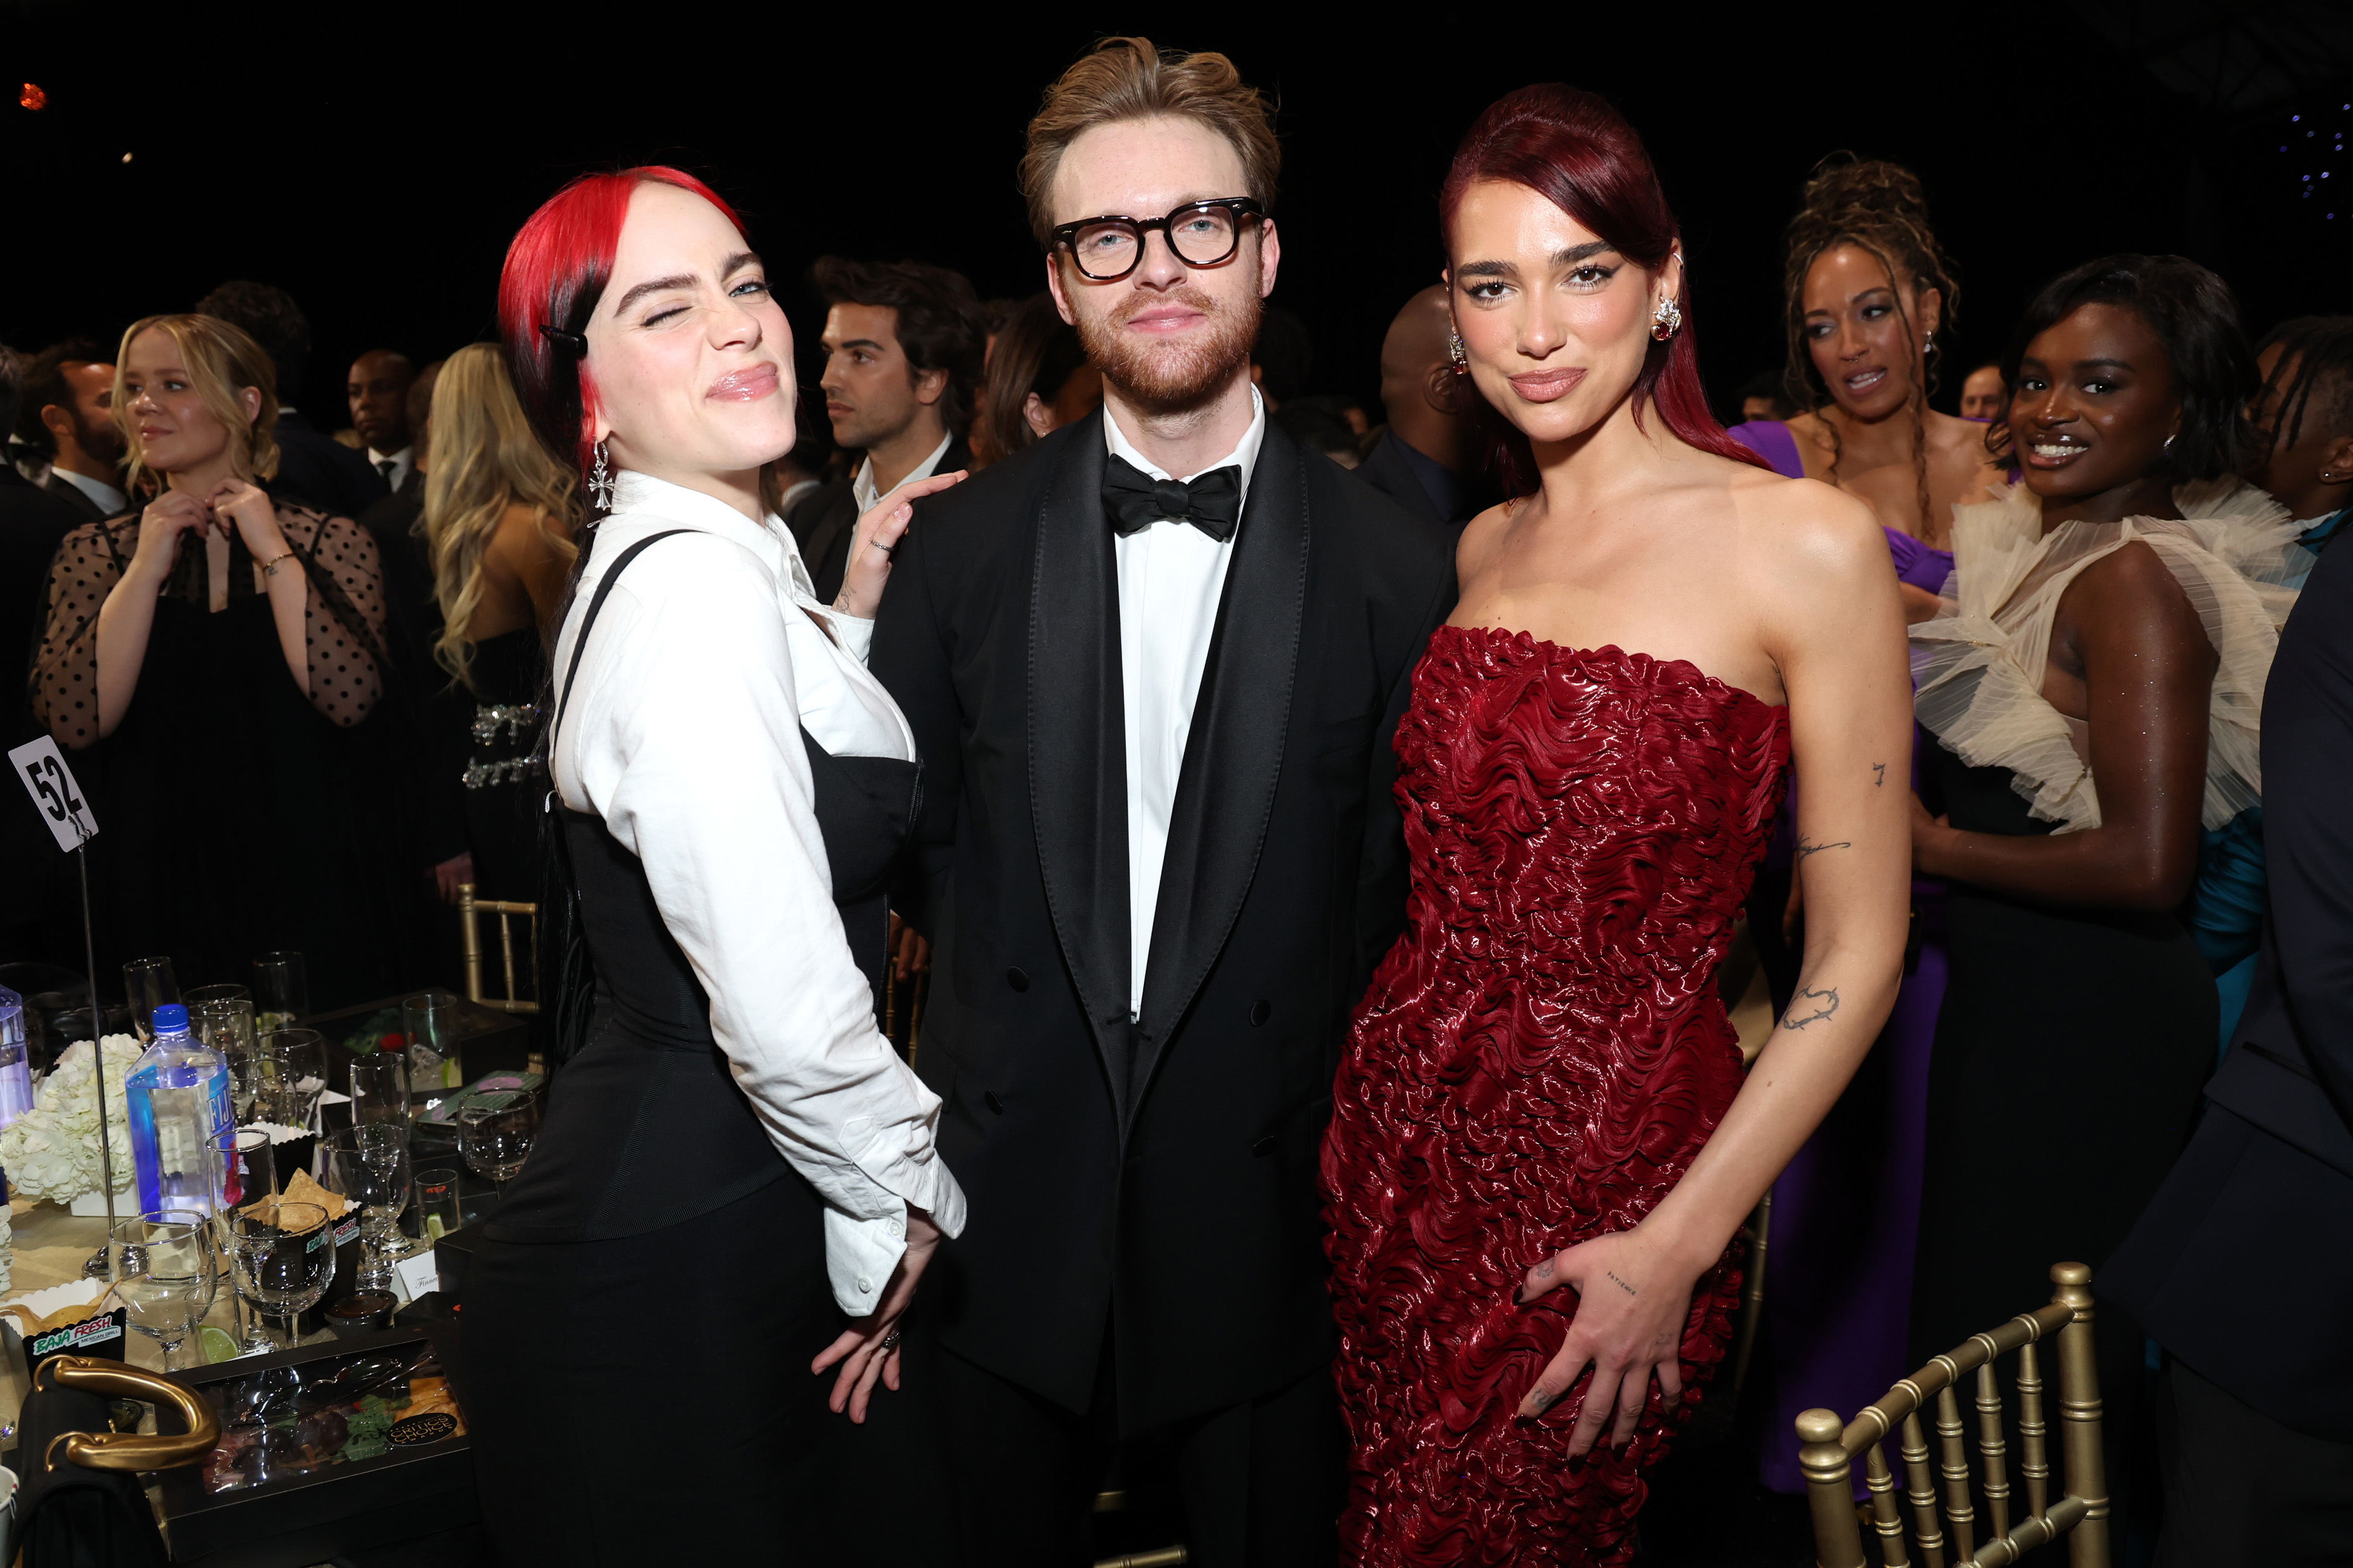 Billie Eilish, Finneas, and Dua Lipa pose for a photo at the awards show